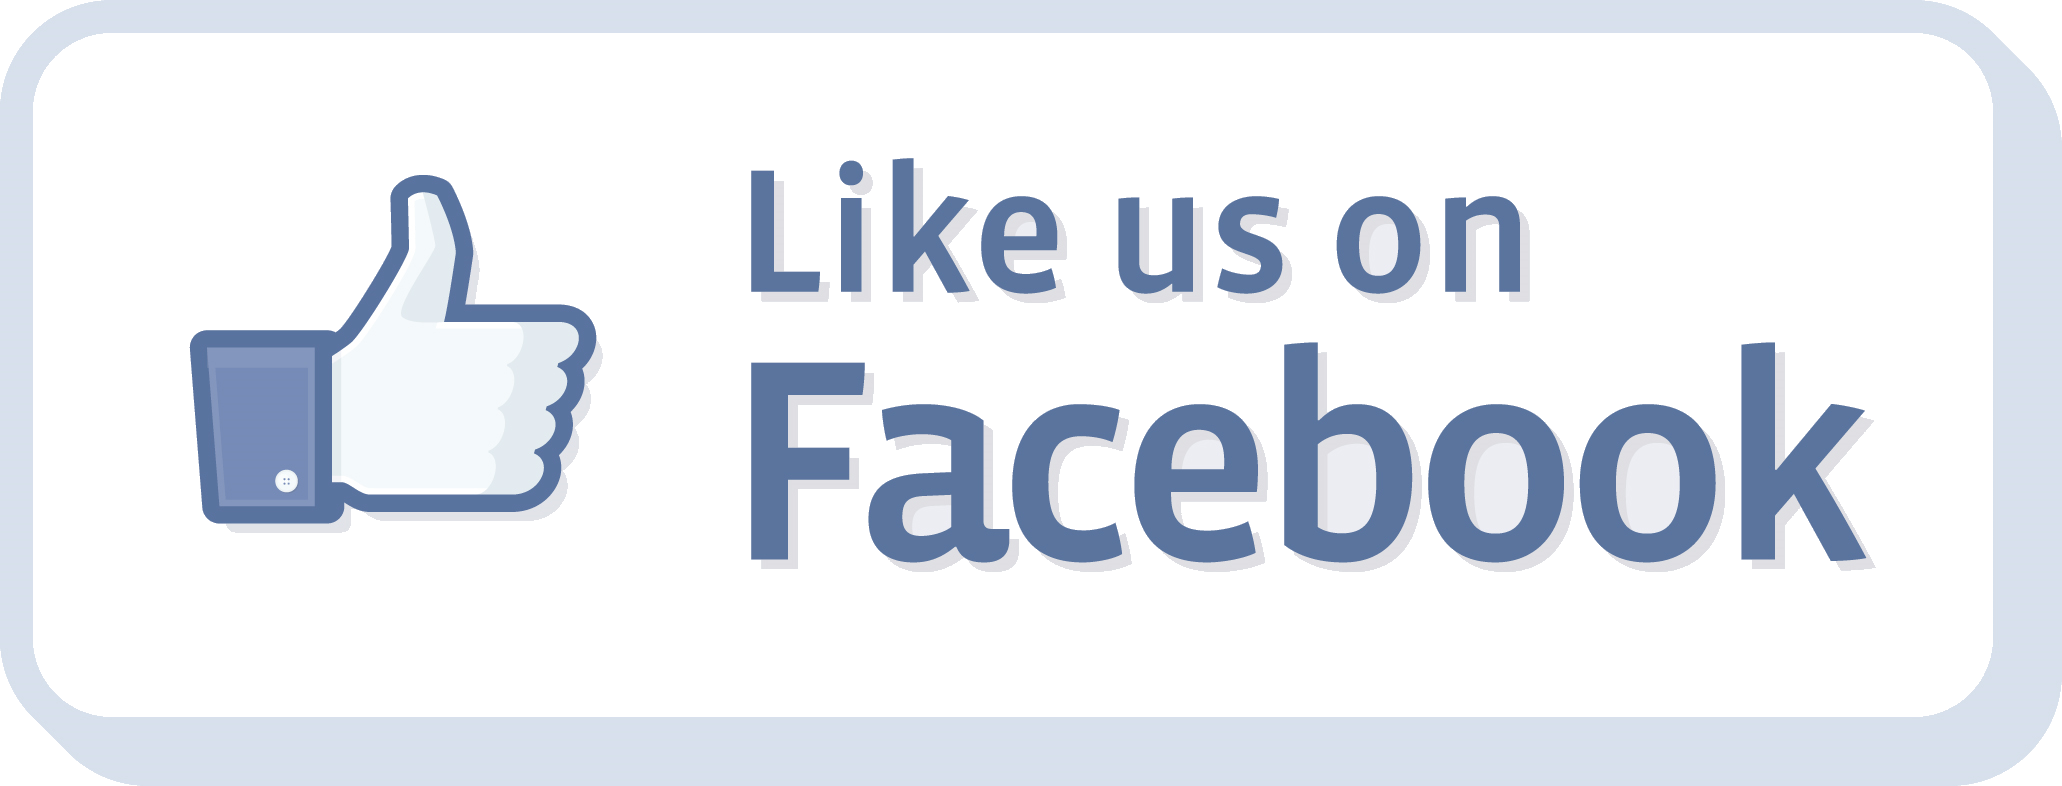 kisspng-facebook-like-button-facebook-like-button-social-m-like-us ...